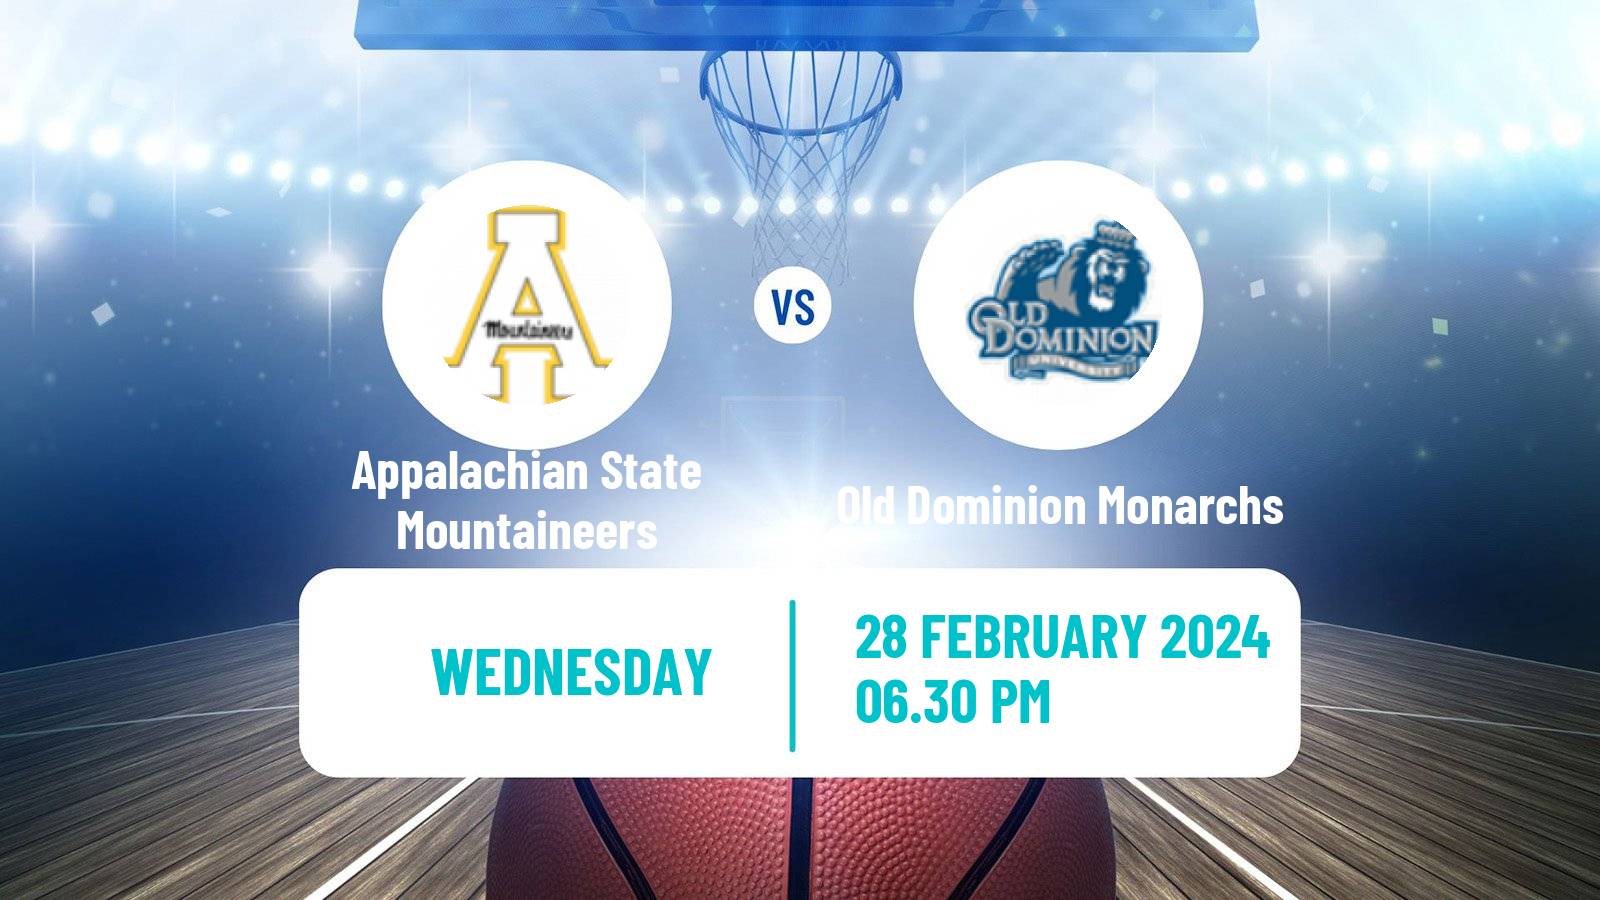 Basketball NCAA College Basketball Appalachian State Mountaineers - Old Dominion Monarchs